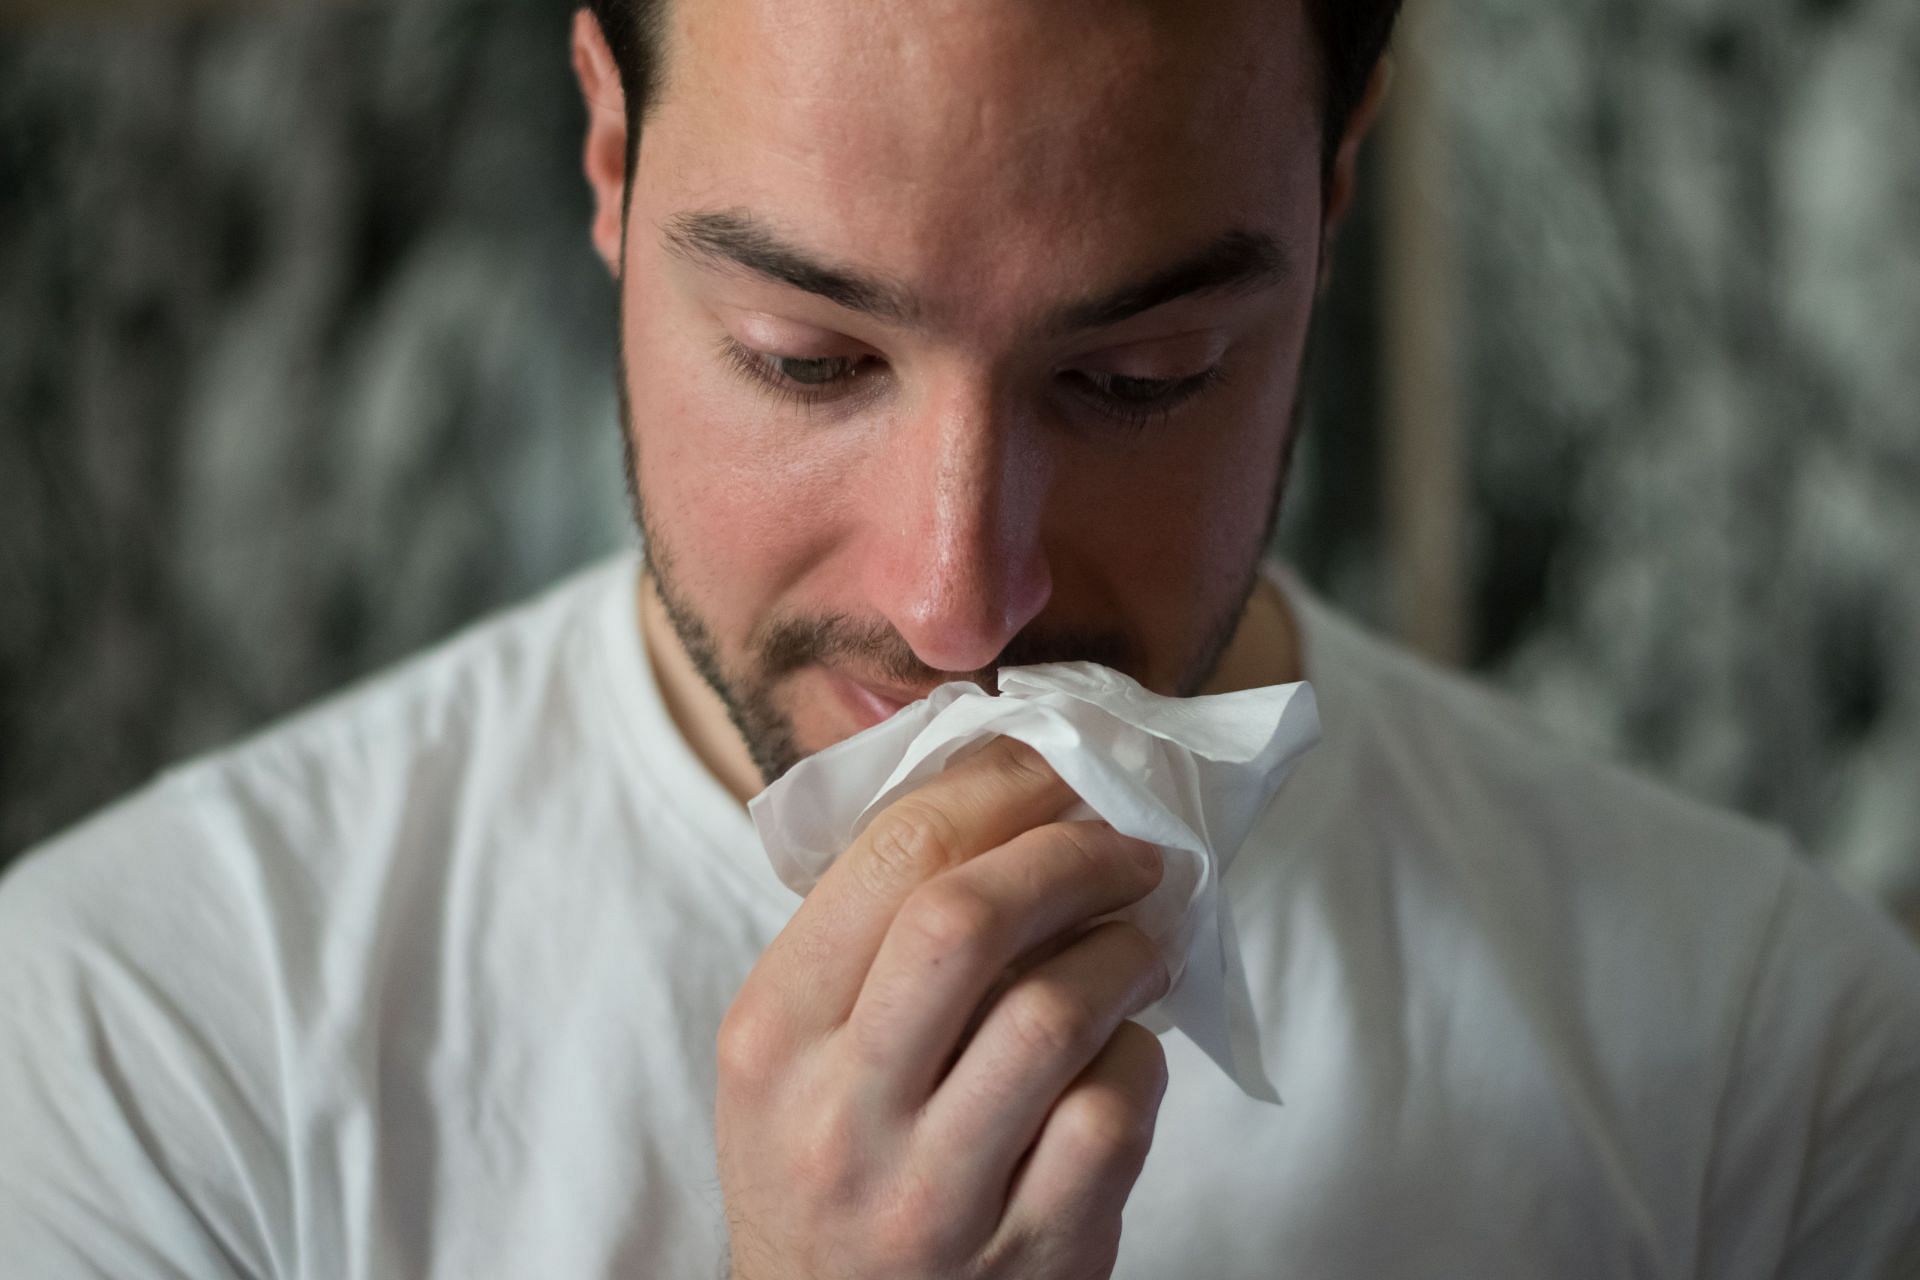 Home remedies to clear a stuffy nose (Image via Unsplash/Brittany Colette)